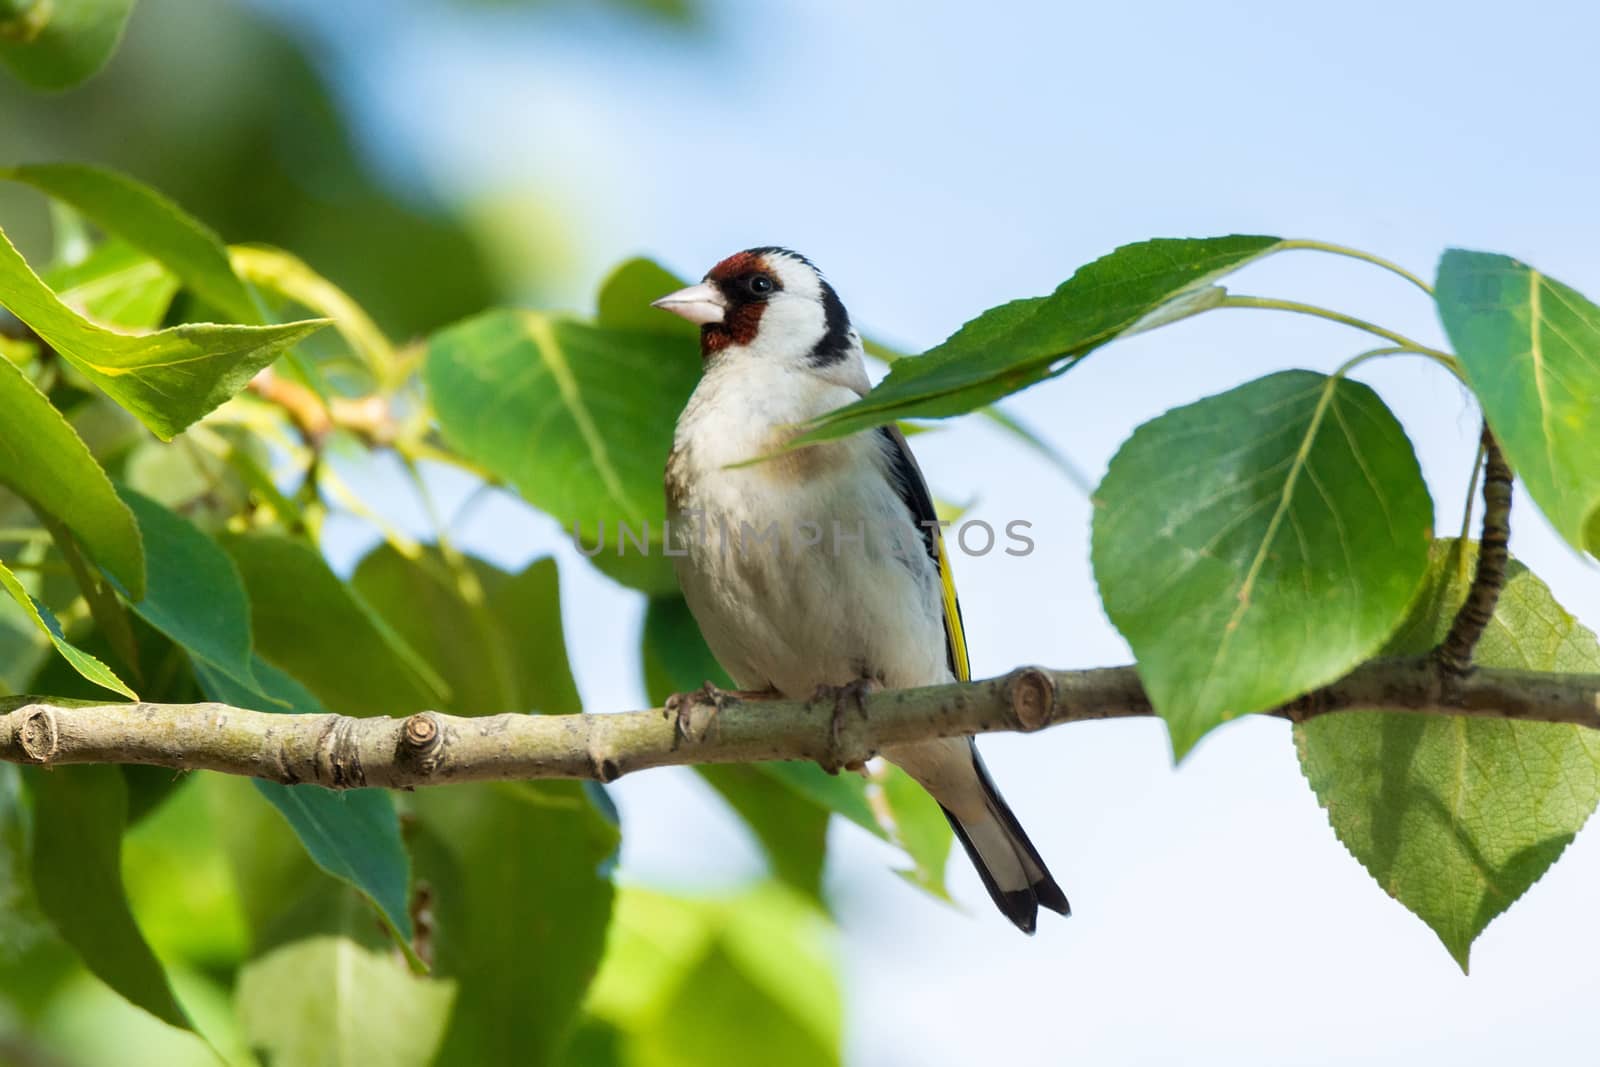 The photograph shows a goldfinch on a branch